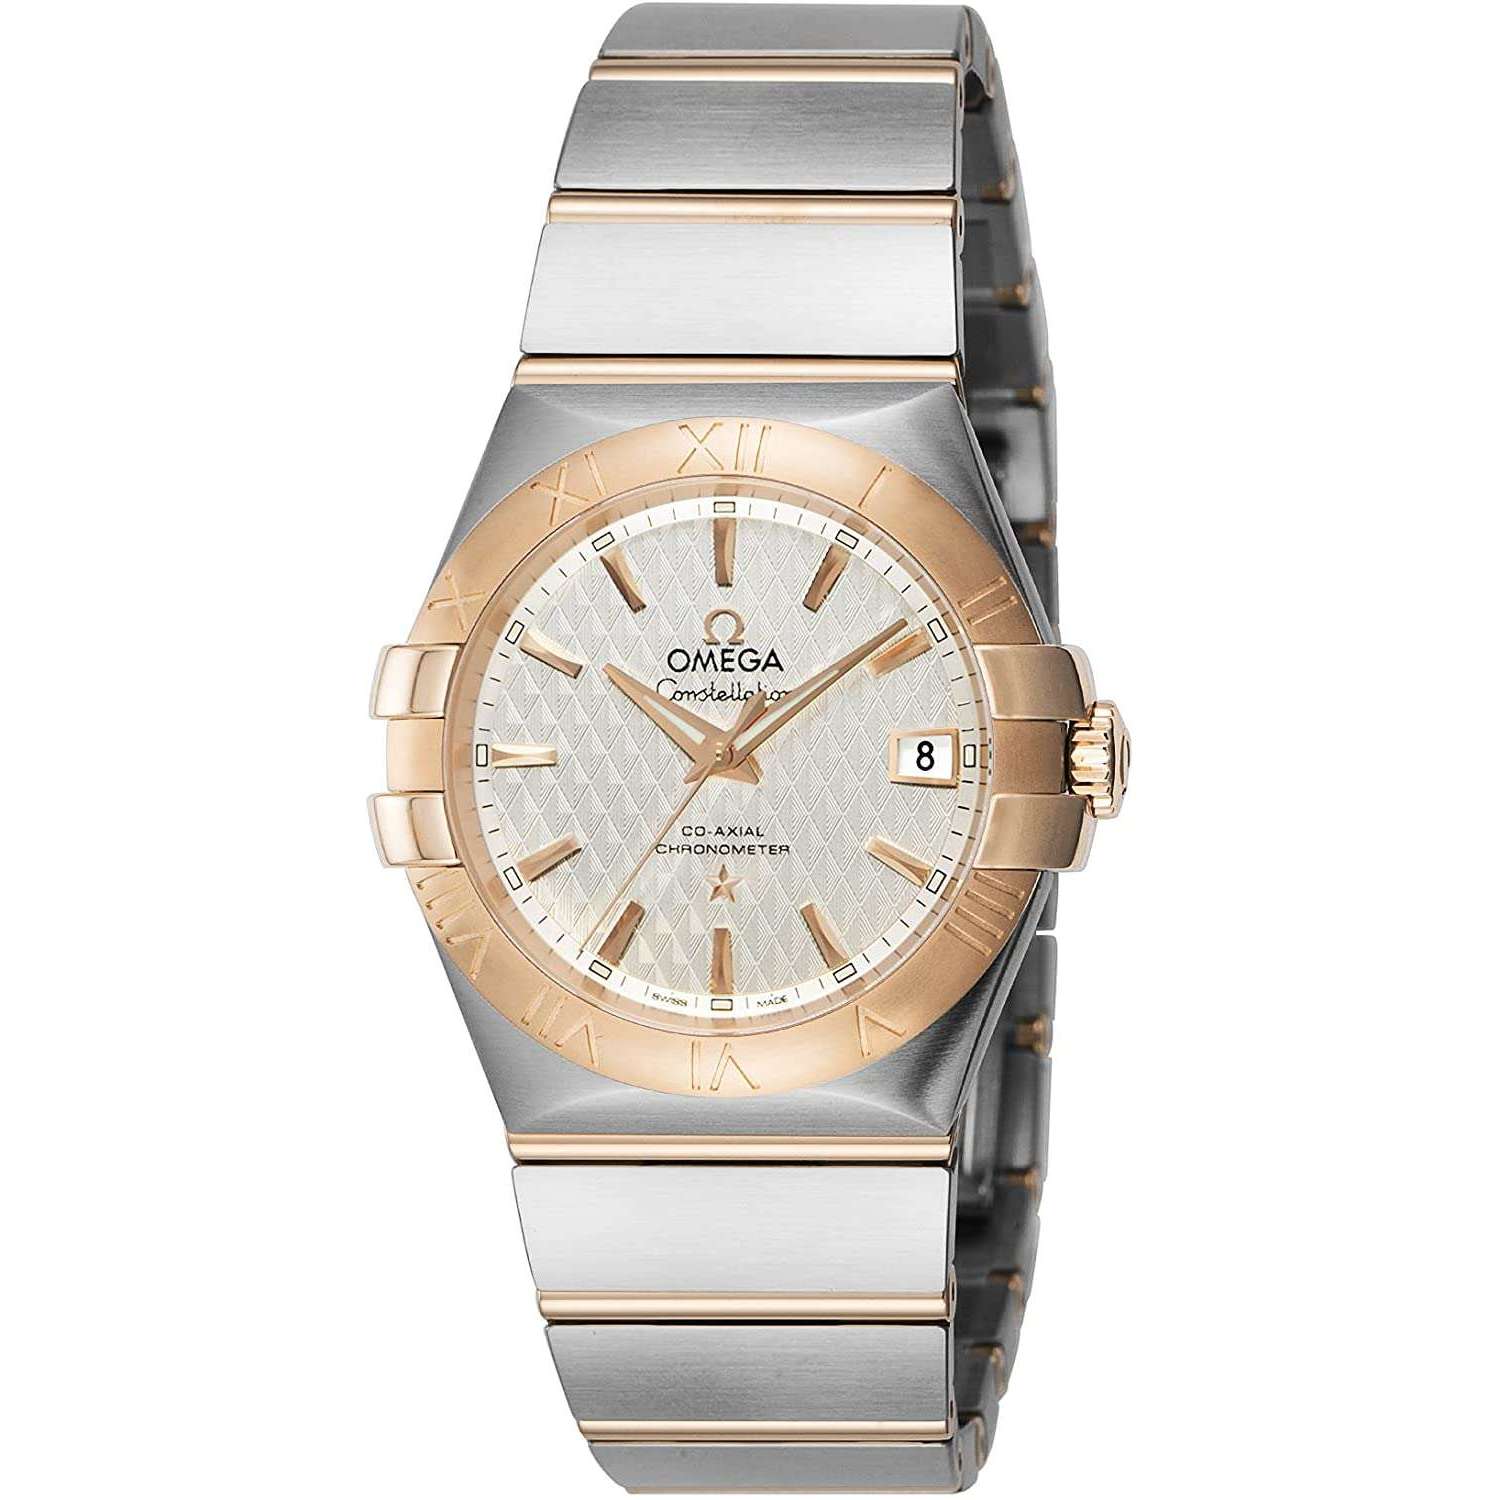 OMEGA CONSTELLATION CO-AXIAL CHRONOMETER 35 MM MEN WATCH 123.20.35.20.02.005 - ROOK JAPAN